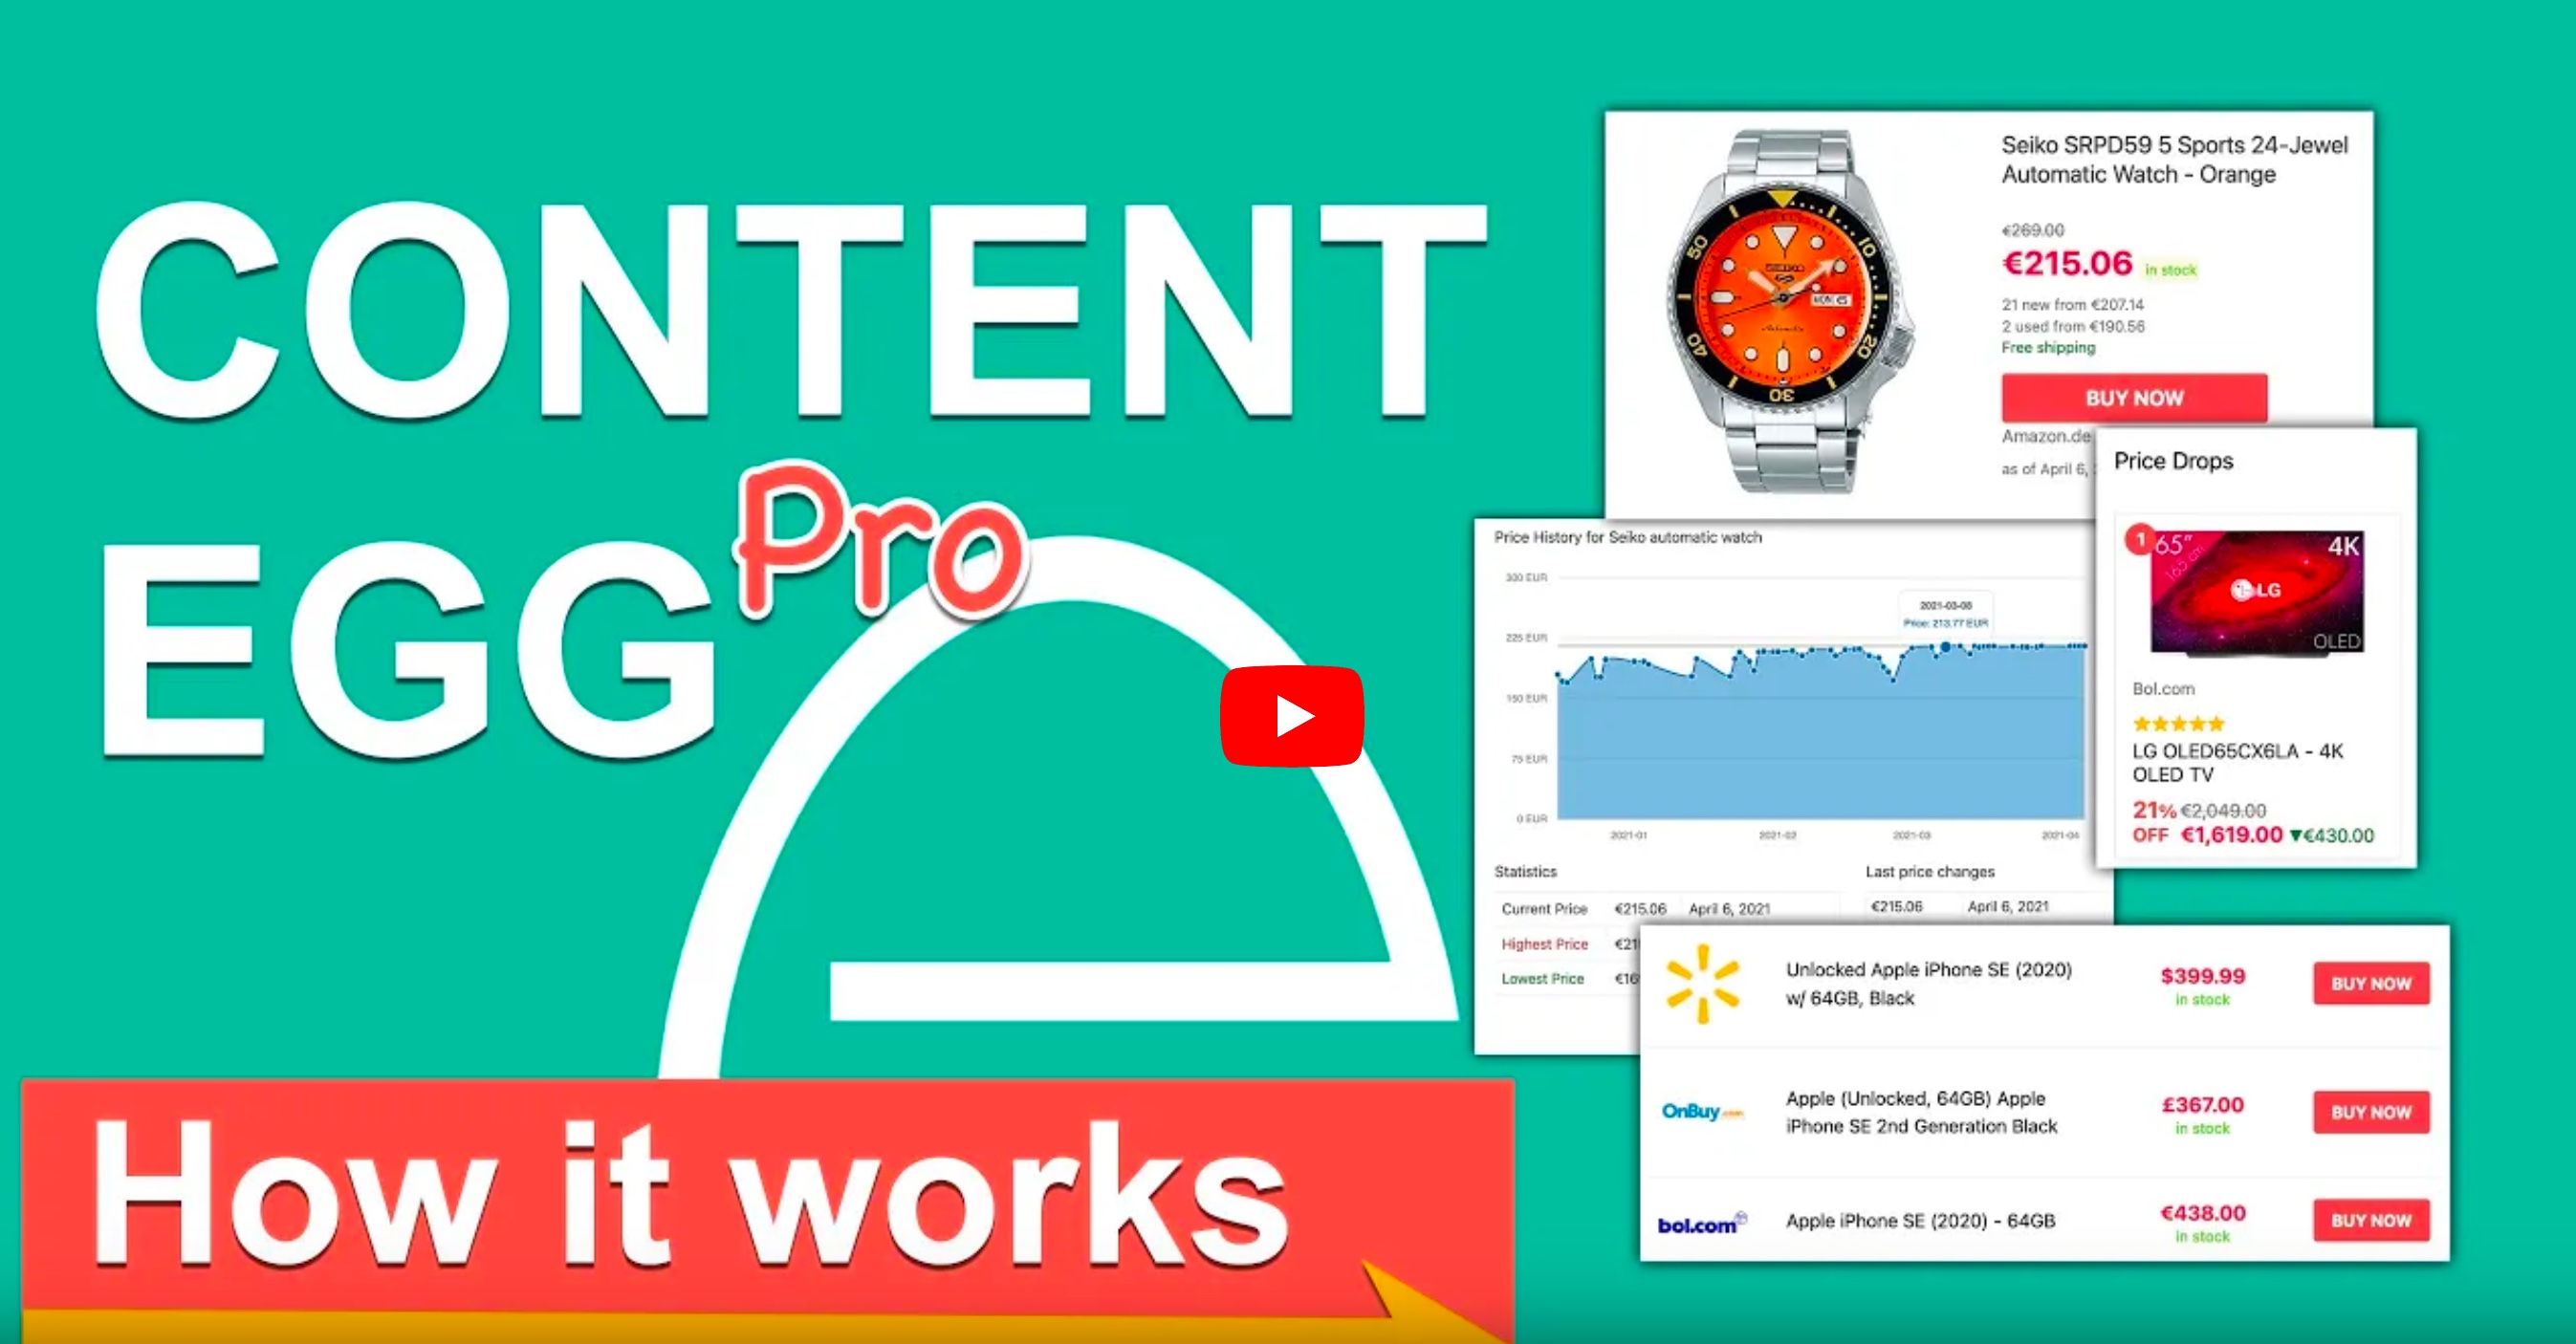 Content Egg - How it works